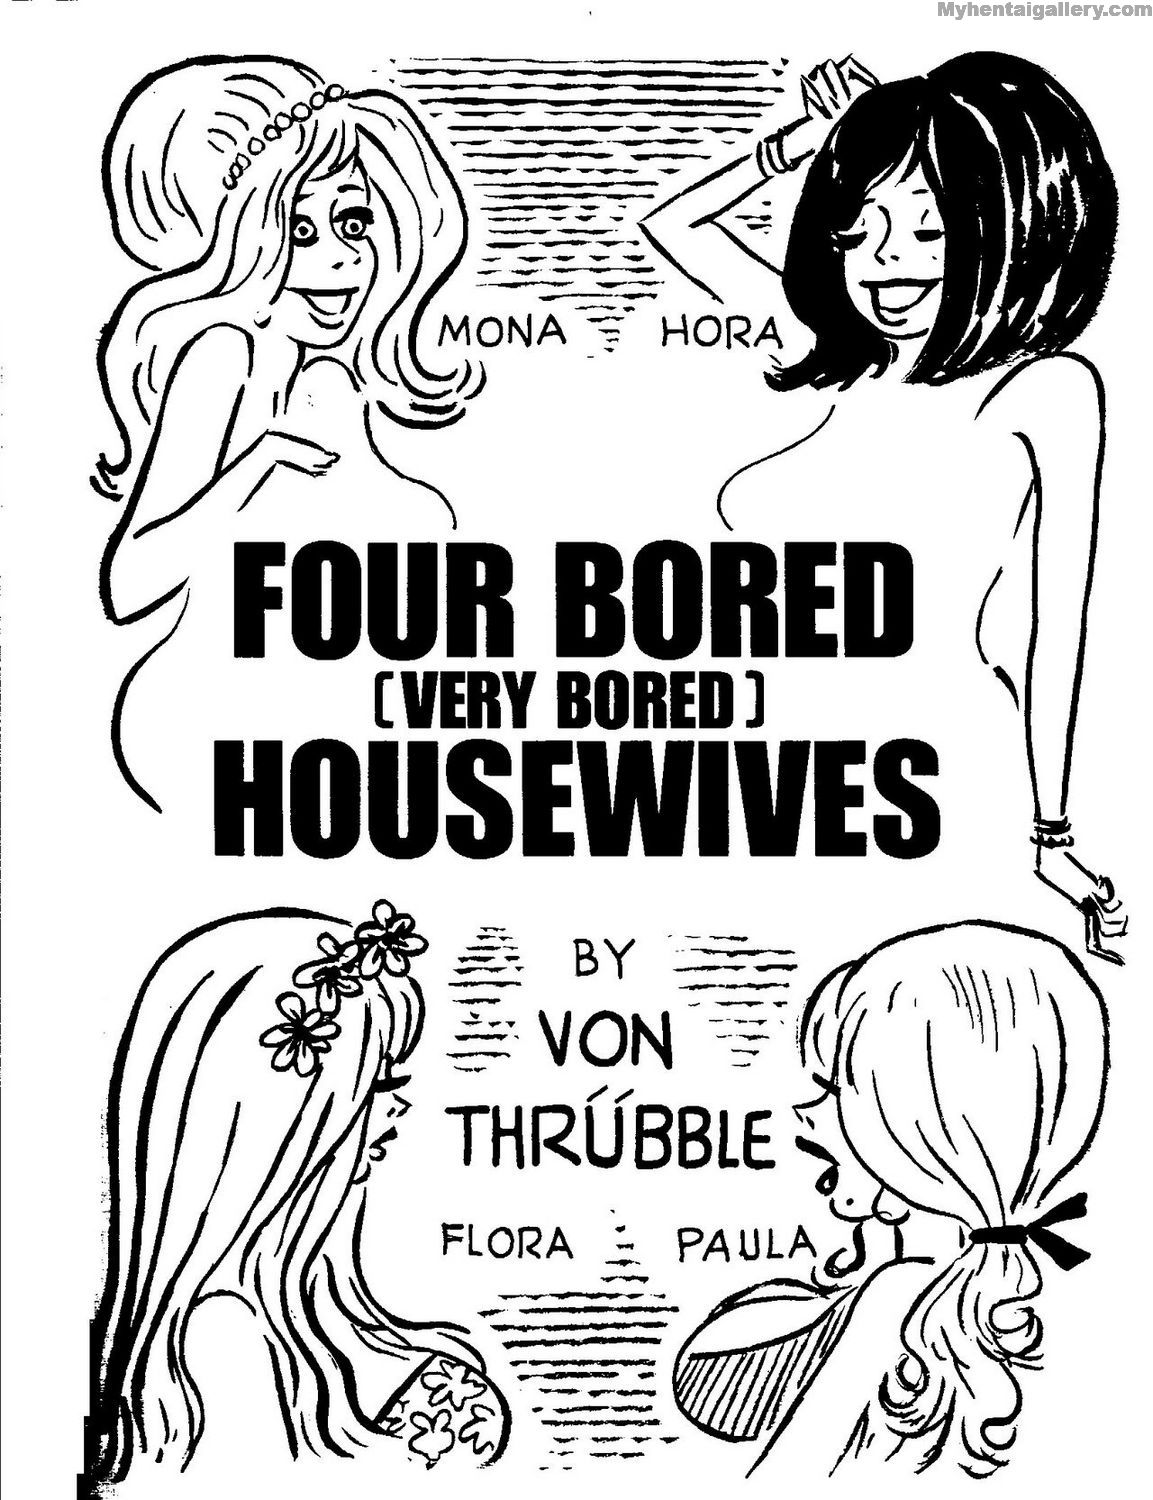 Four Very Bored Housewives 3 - Mona Pools Her Resources